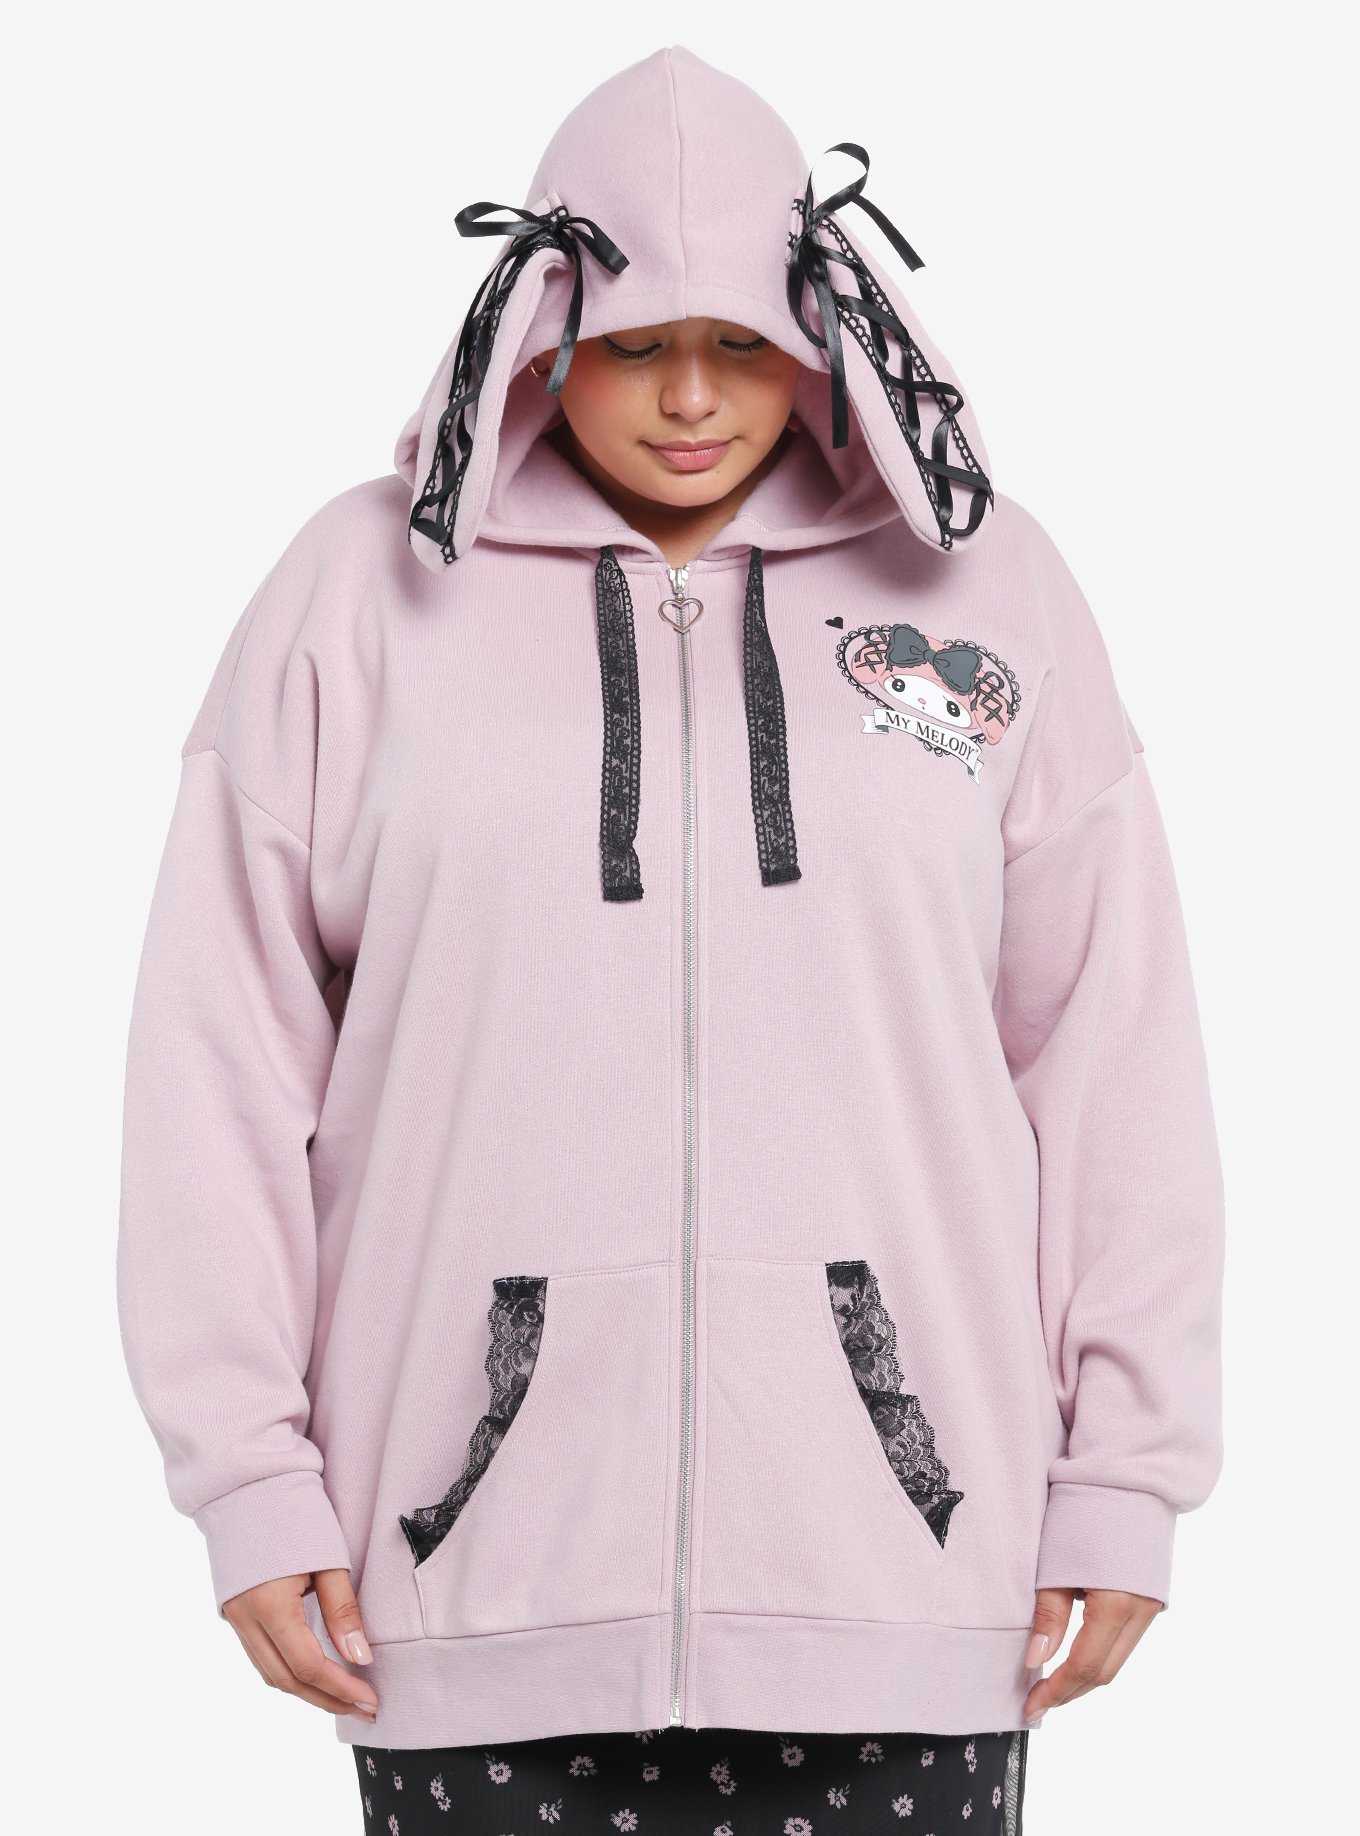 My Melody Lolita Lace 3D Ear Hoodie Plus Size, , hi-res